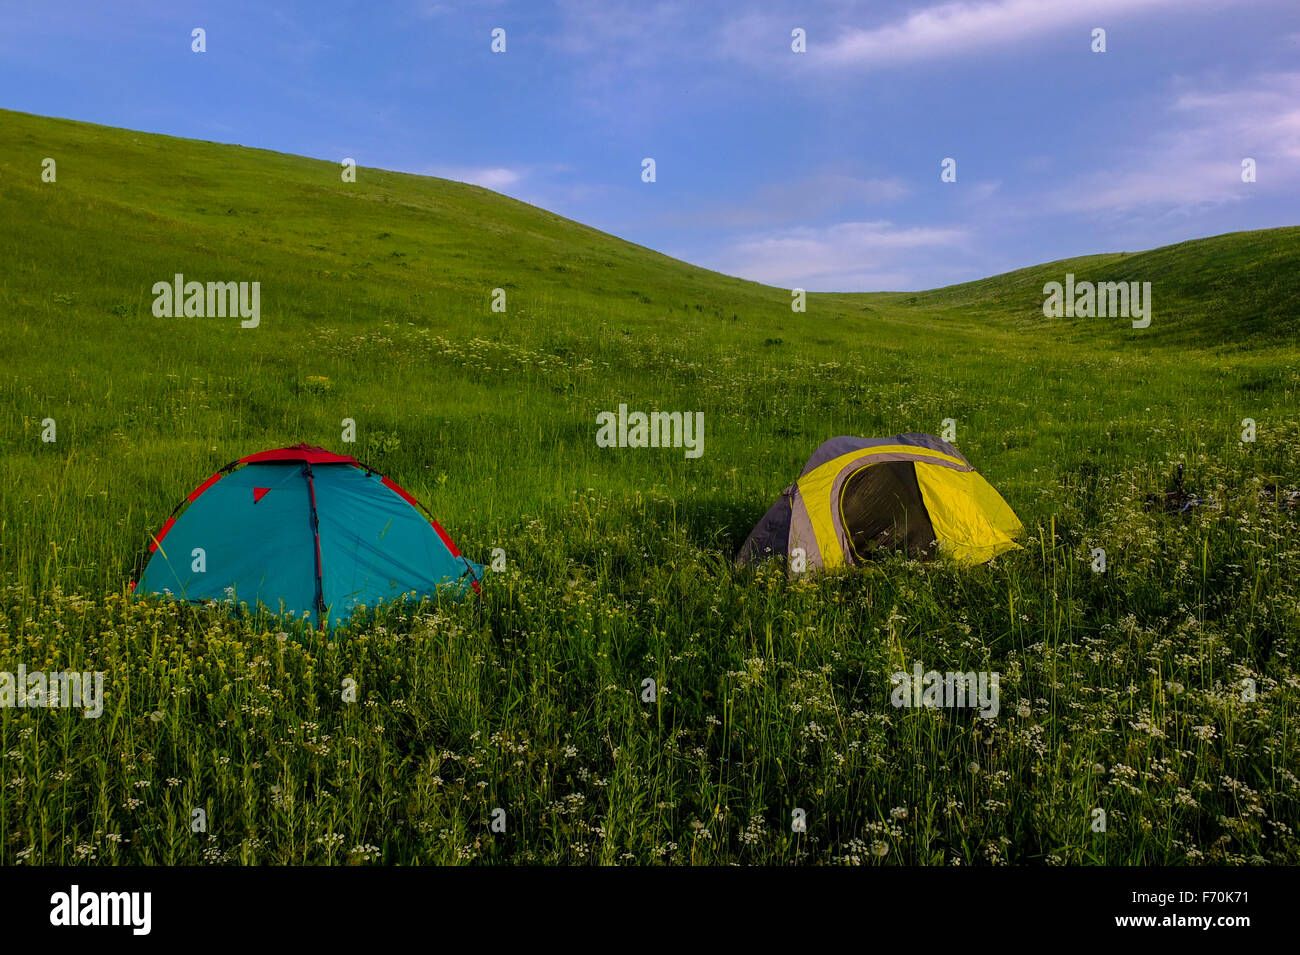 Tents in a lush green field similar to the windows XP wallpaper with a blue sky. Remote adventure camping in beautiful surroundings. Stock Photo